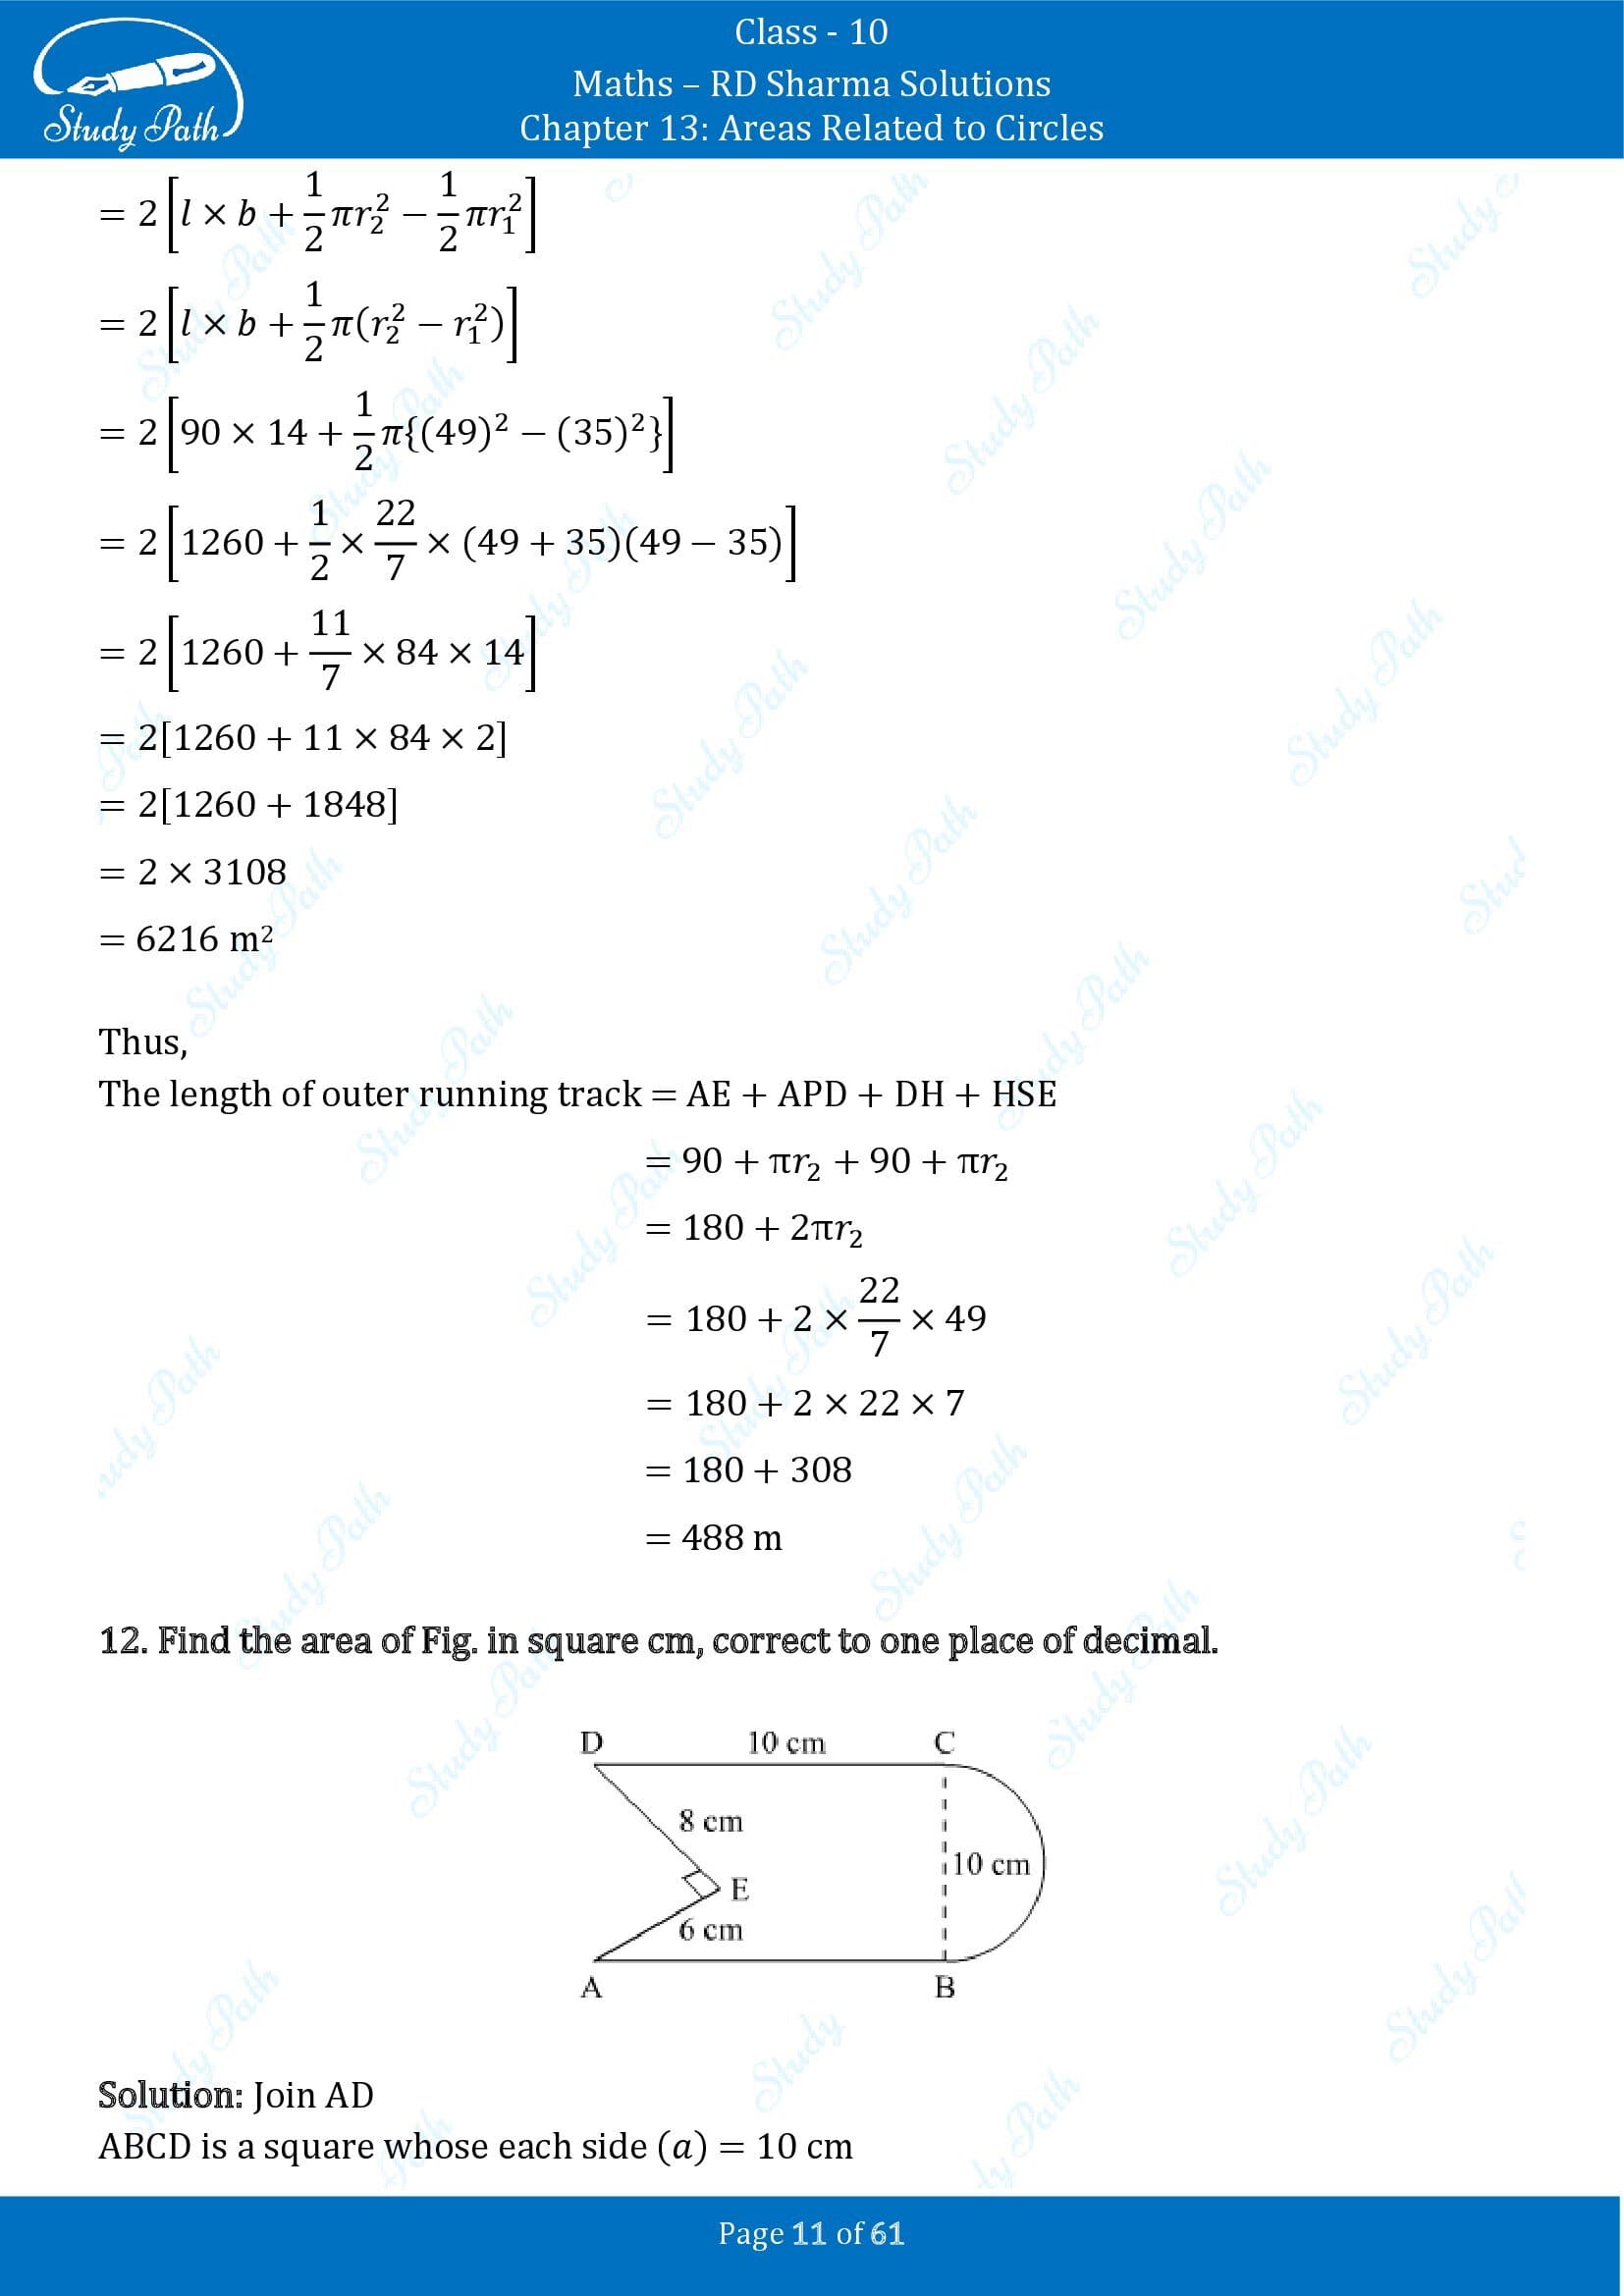 RD Sharma Solutions Class 10 Chapter 13 Areas Related to Circles Exercise 13.4 00011